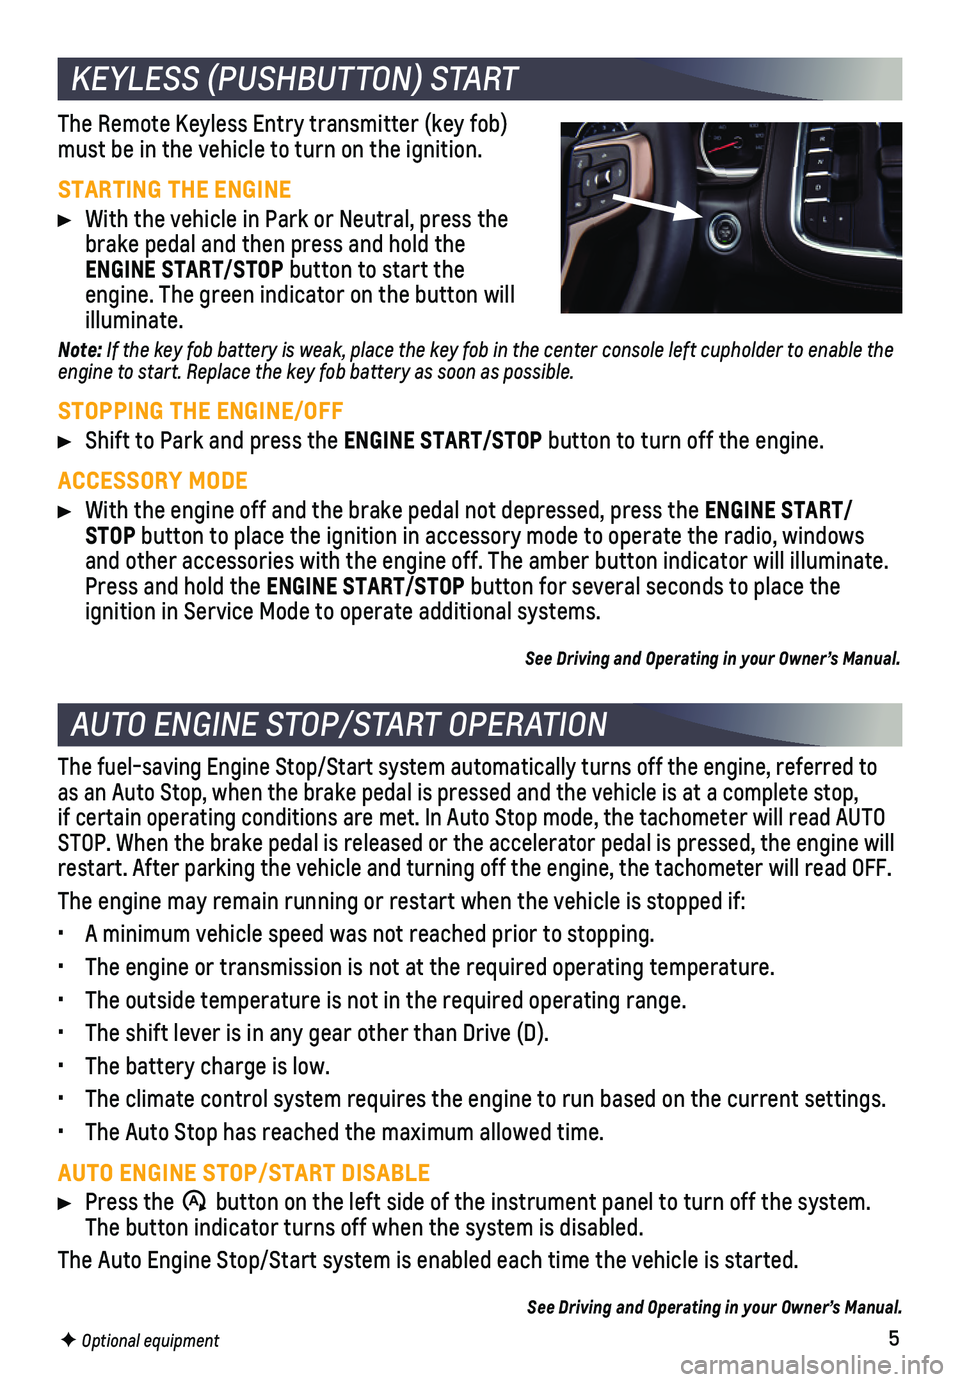 CHEVROLET TAHOE 2021  Get To Know Guide 5F Optional equipment
The fuel-saving Engine Stop/Start system automatically turns off the eng\
ine, referred to as an Auto Stop, when the brake pedal is pressed and the vehicle is at a\
 complete sto